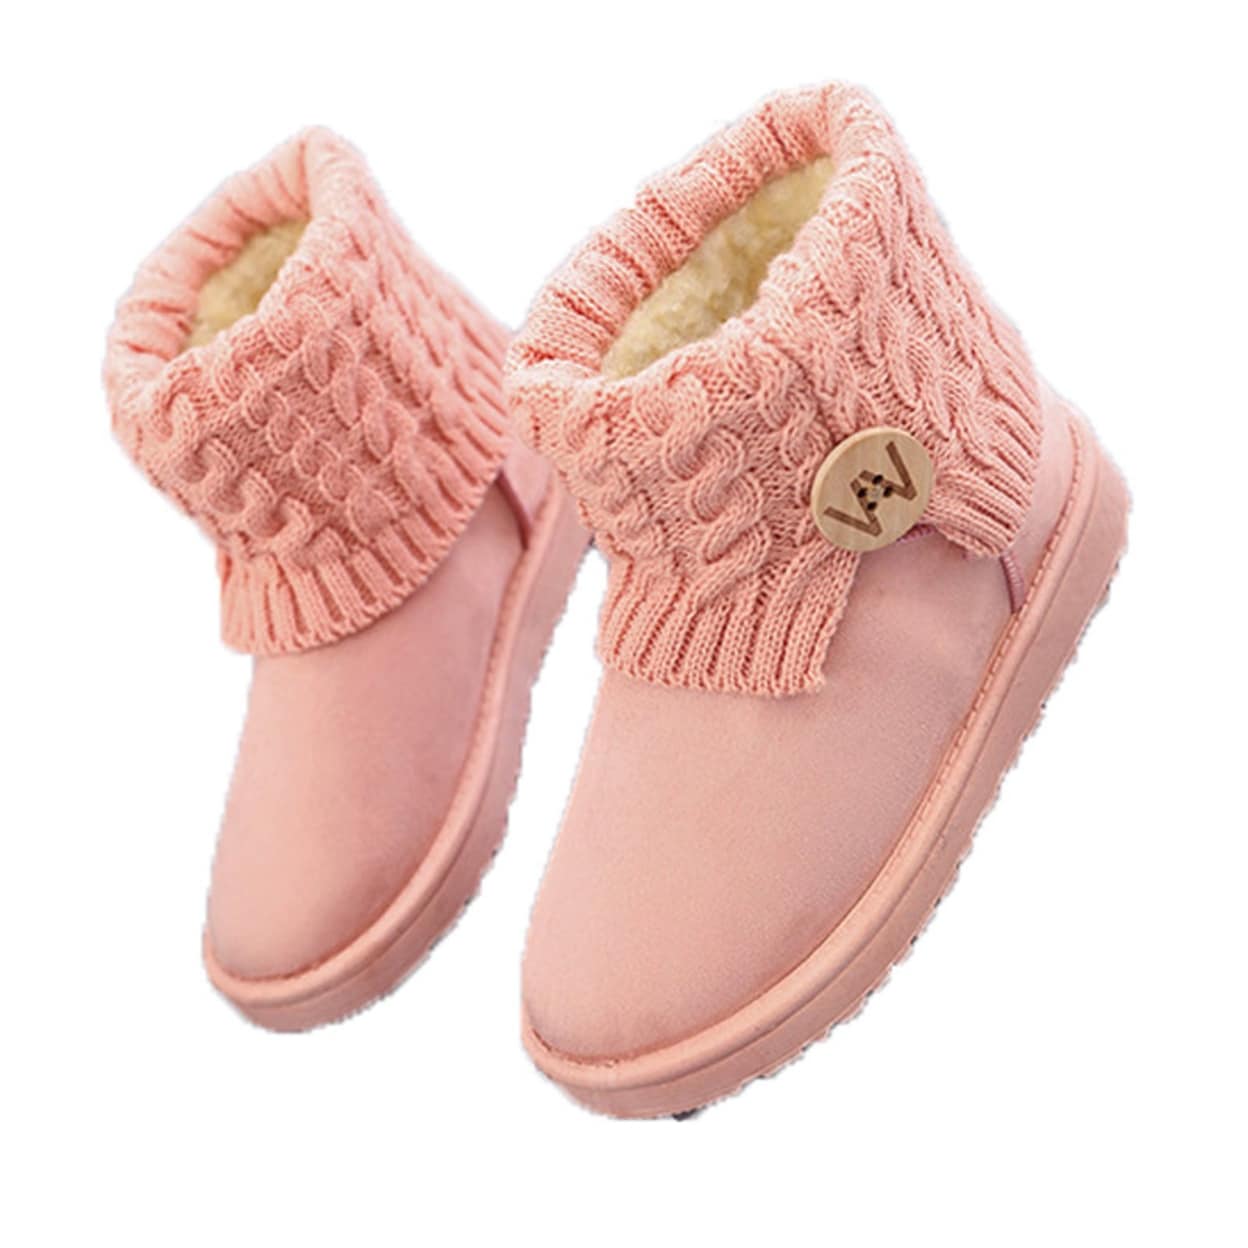 pink winter boots for adults